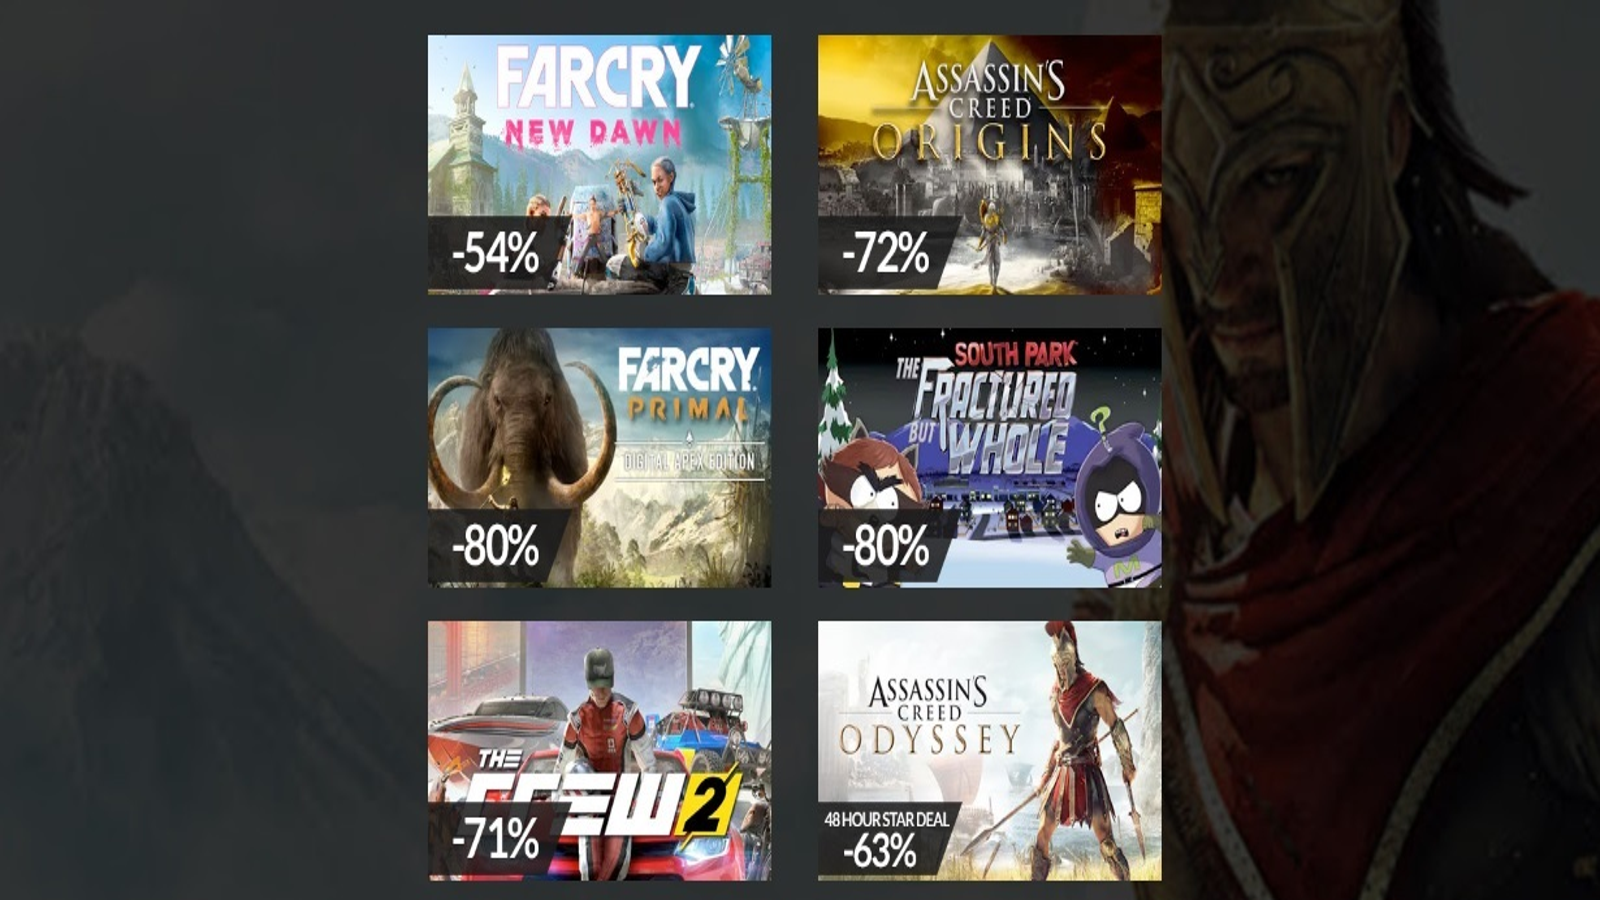 Ubisoft is hosting a big Assassin's Creed Steam sale